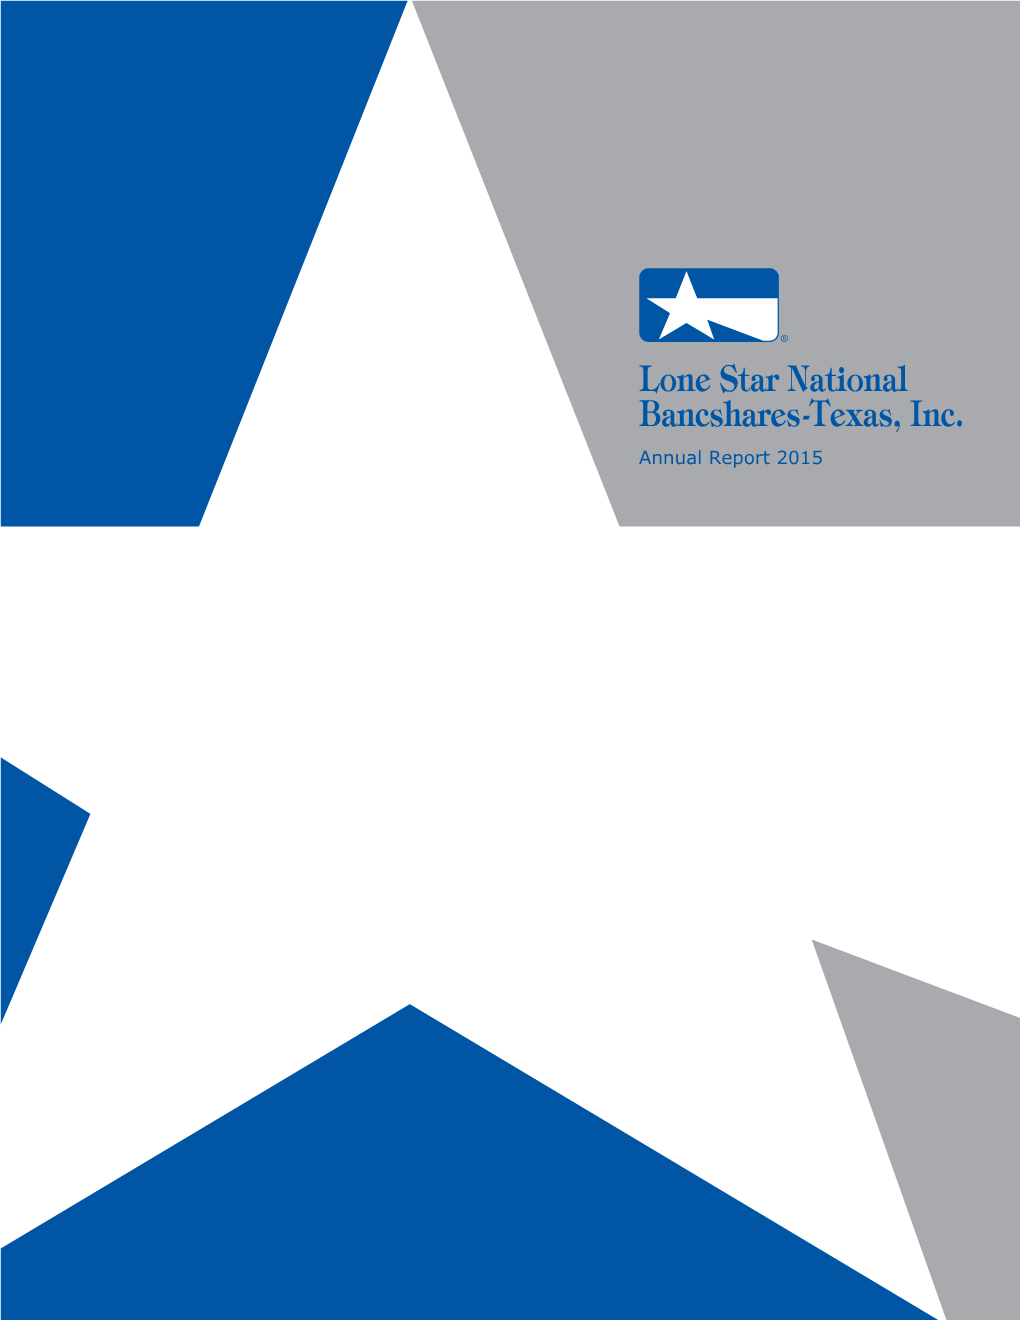 Lone Star National Bancshares-Texas, Inc. Annual Report 2015 Our Mission Statement